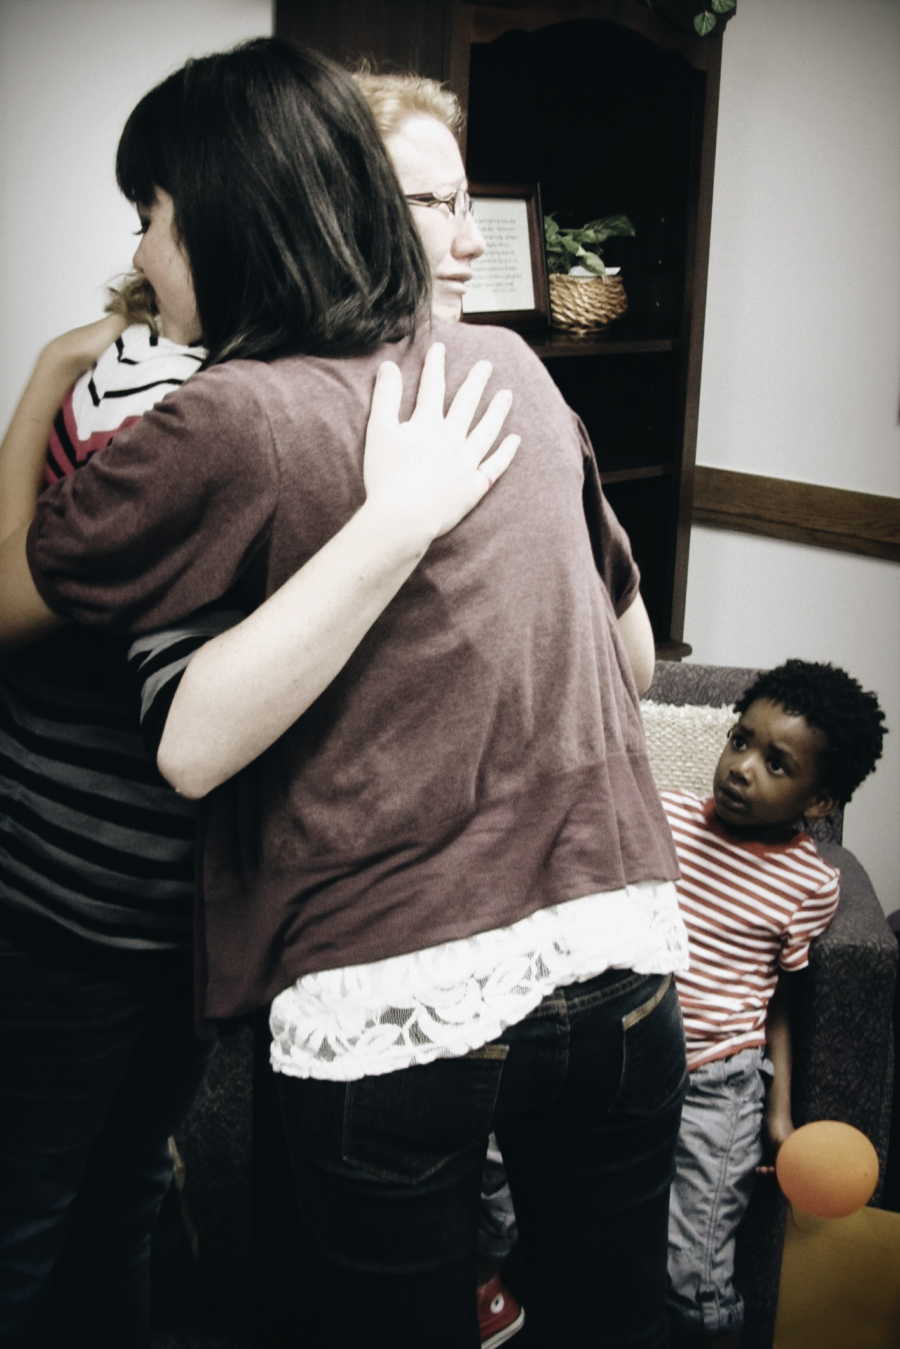 Mother hugs woman who had the baby she is adopting with her other adopted son in background